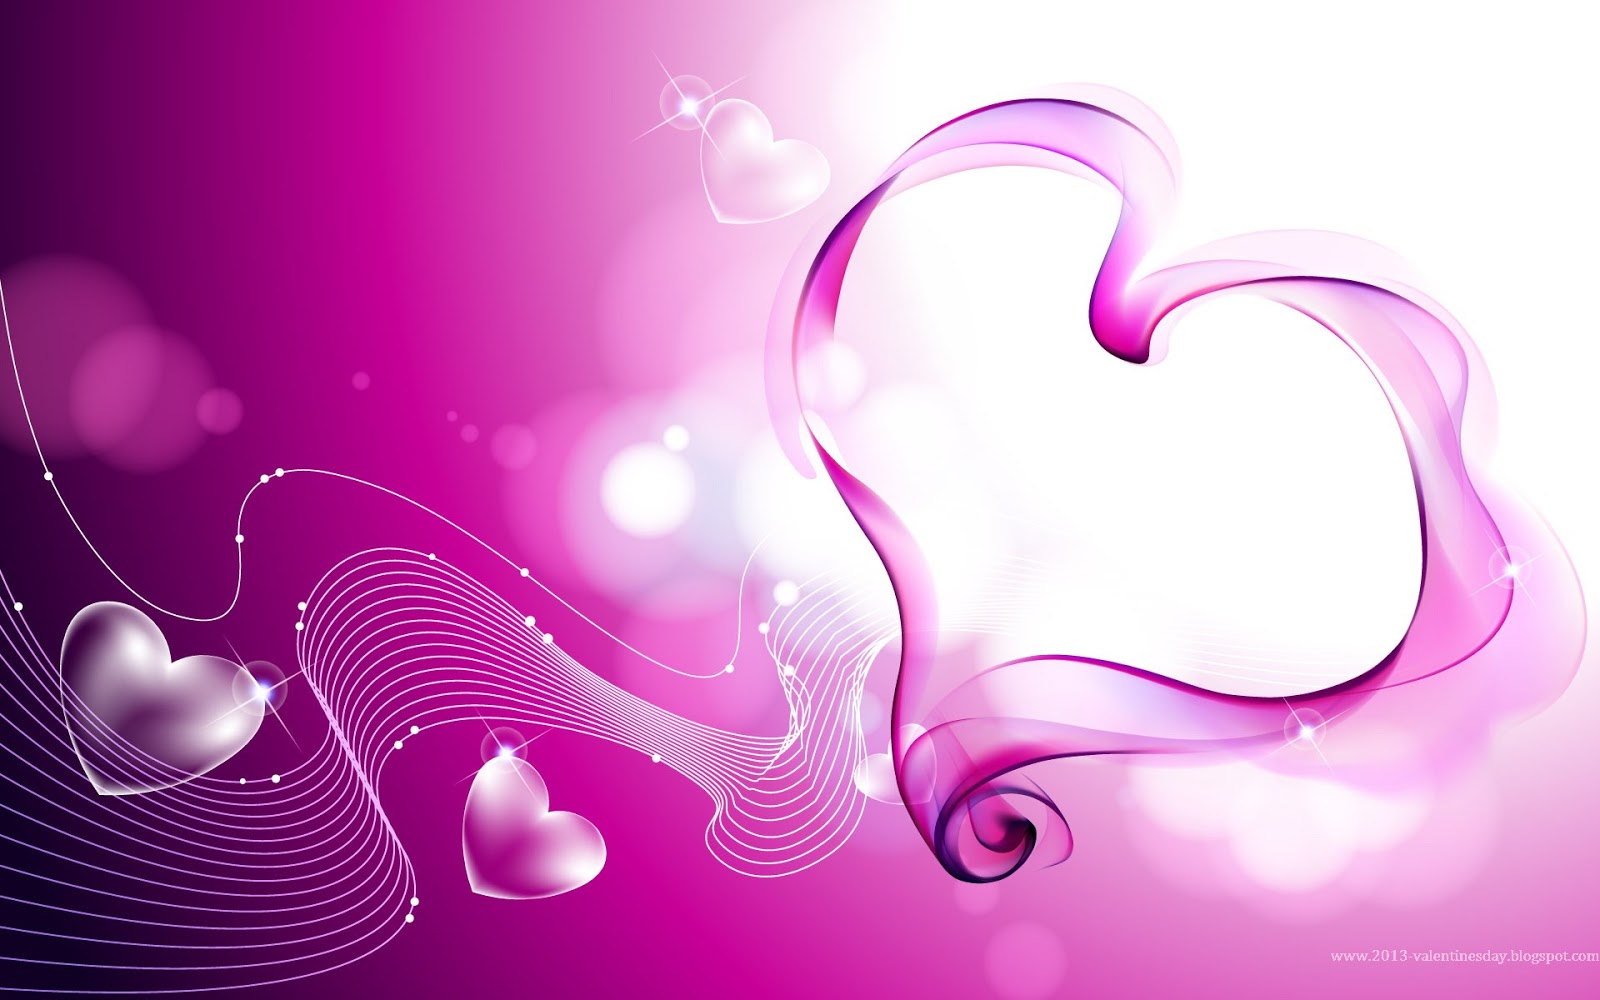 Snooprzgirl Valentines Day Hearts HD Wallpaper 1024px And 1920px